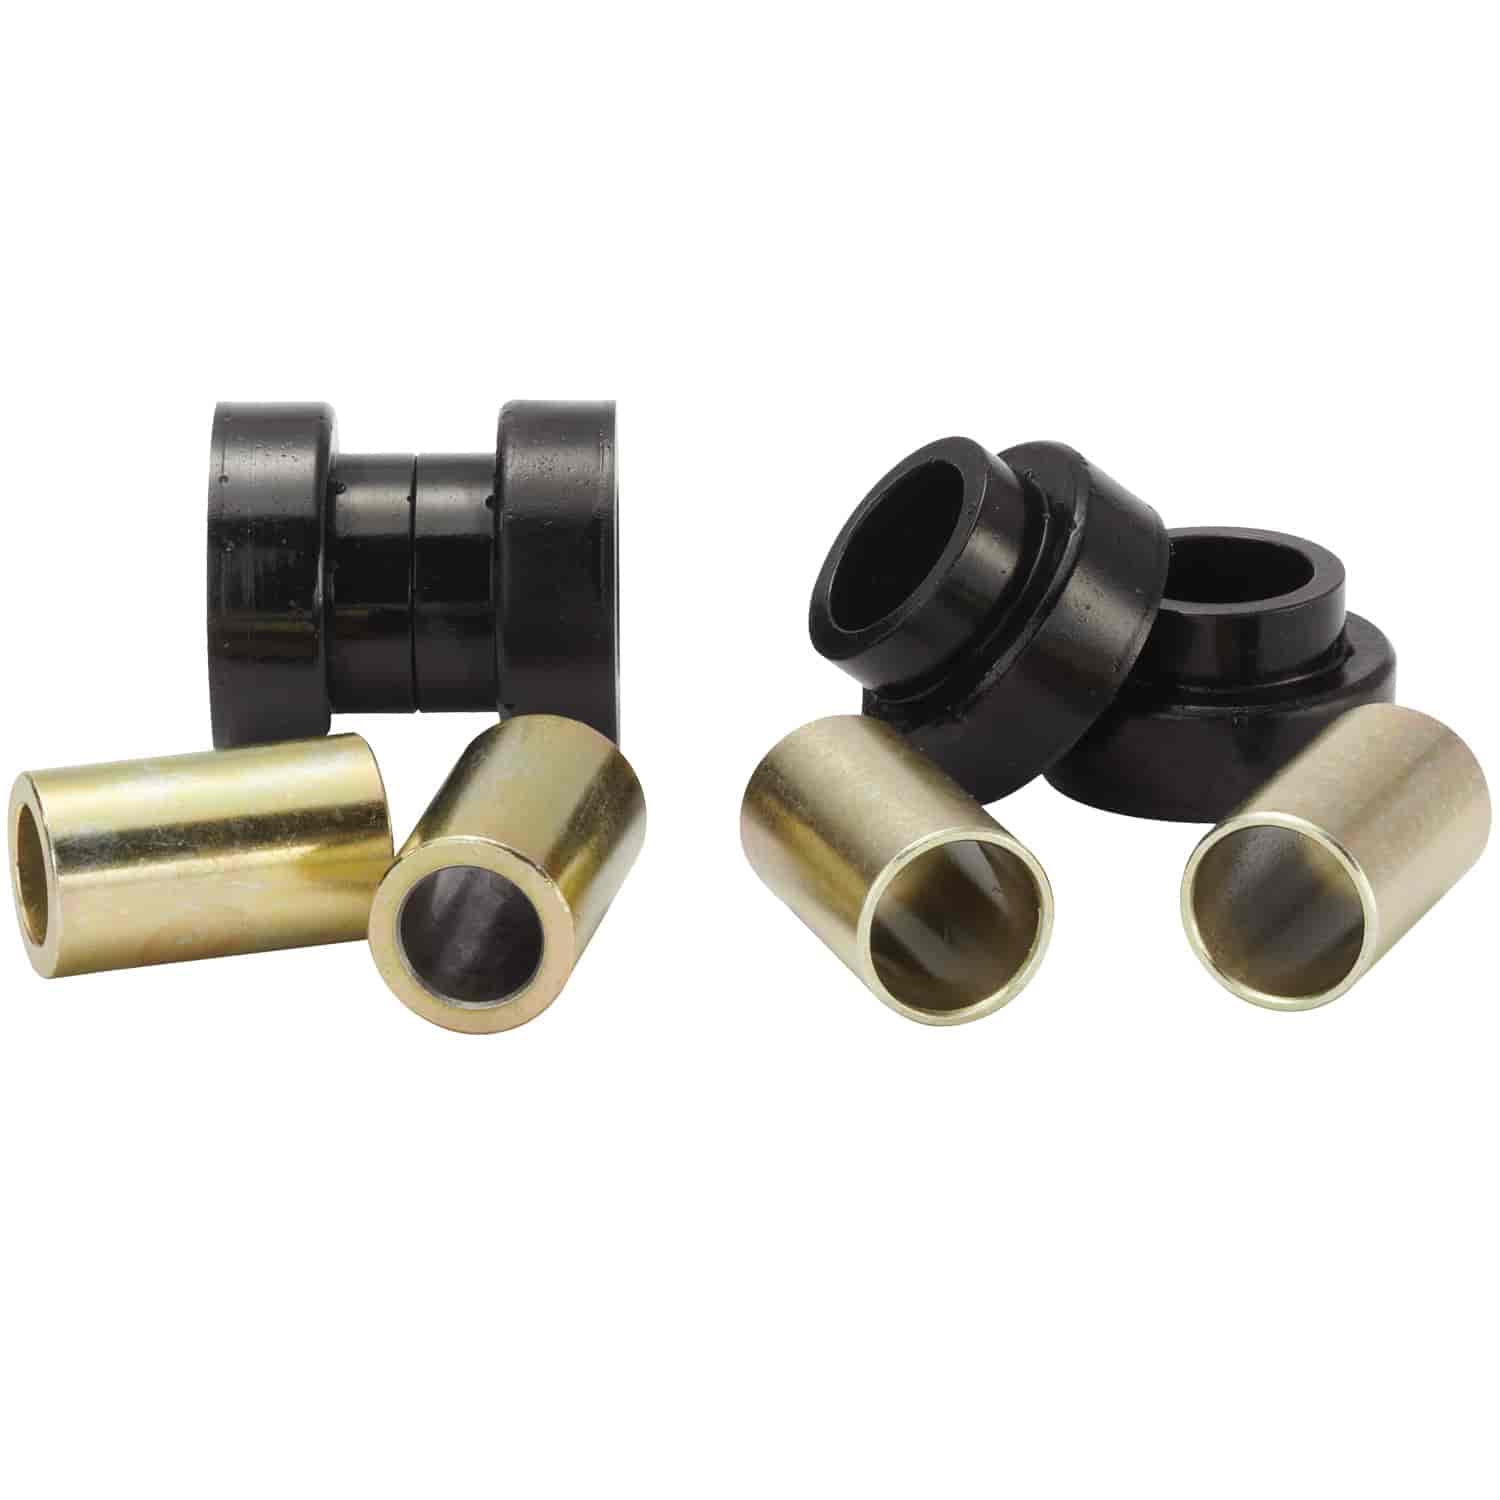 Shock Bushing Kit For Use With Ultra Ride And Aluma Matic Shocks